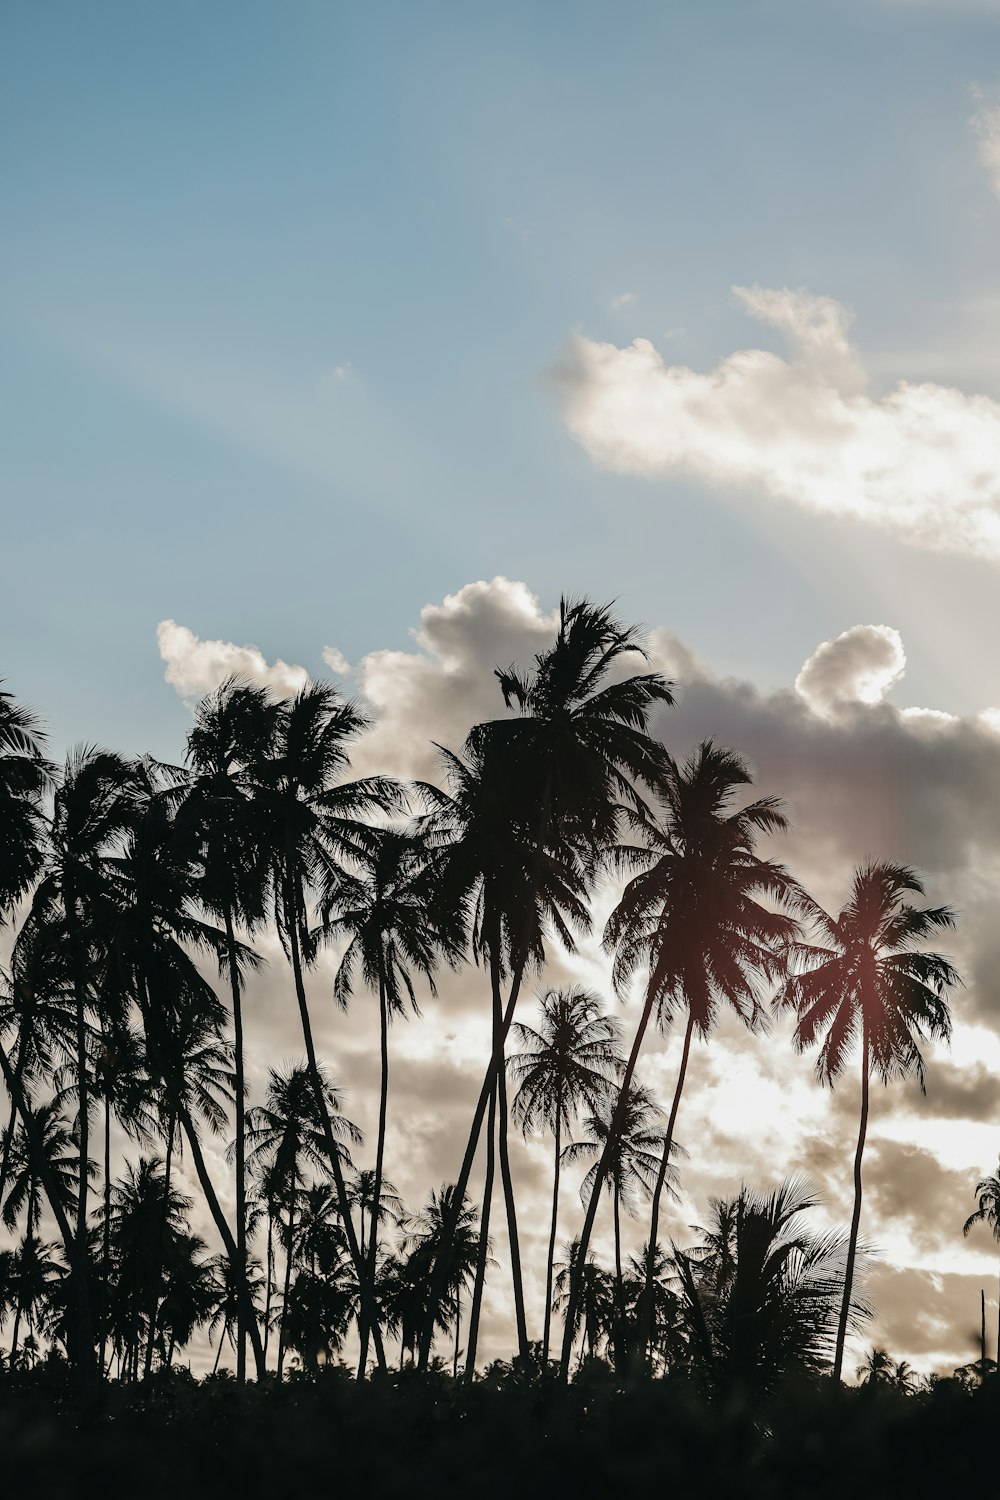 palm trees are silhouetted against a cloudy sky